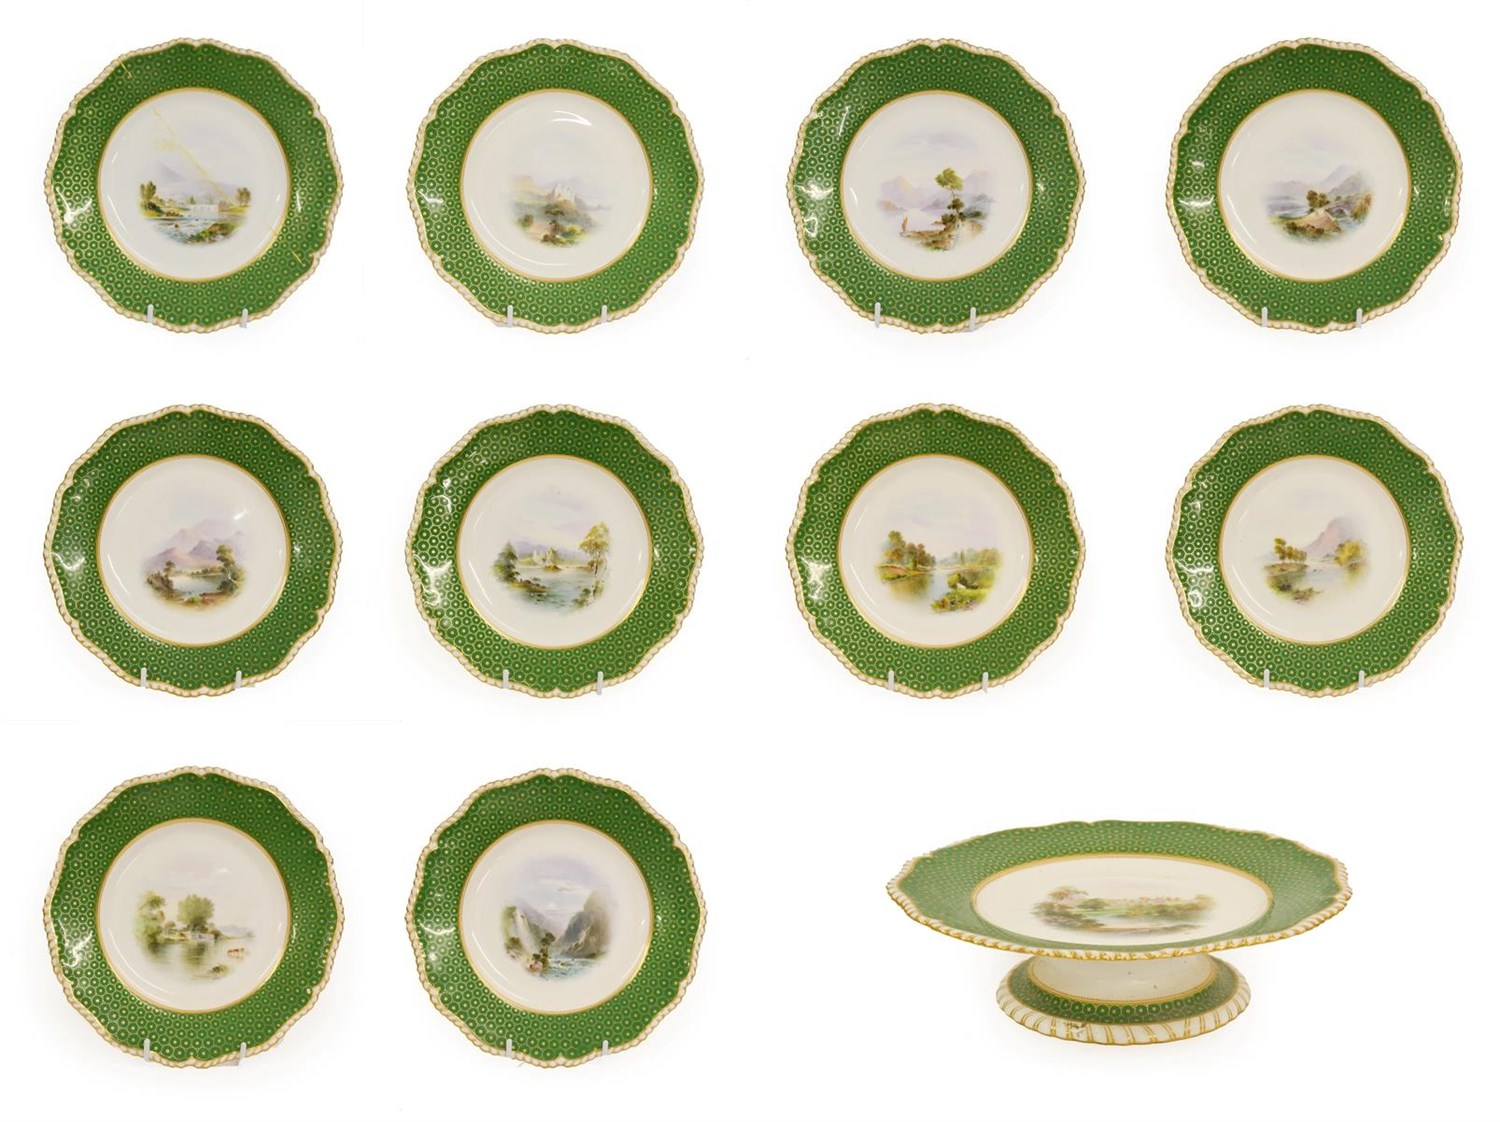 Lot 29 - A Royal Worcester Porcelain Topographical Dessert Service, by Harry Davis, 1900, painted with named